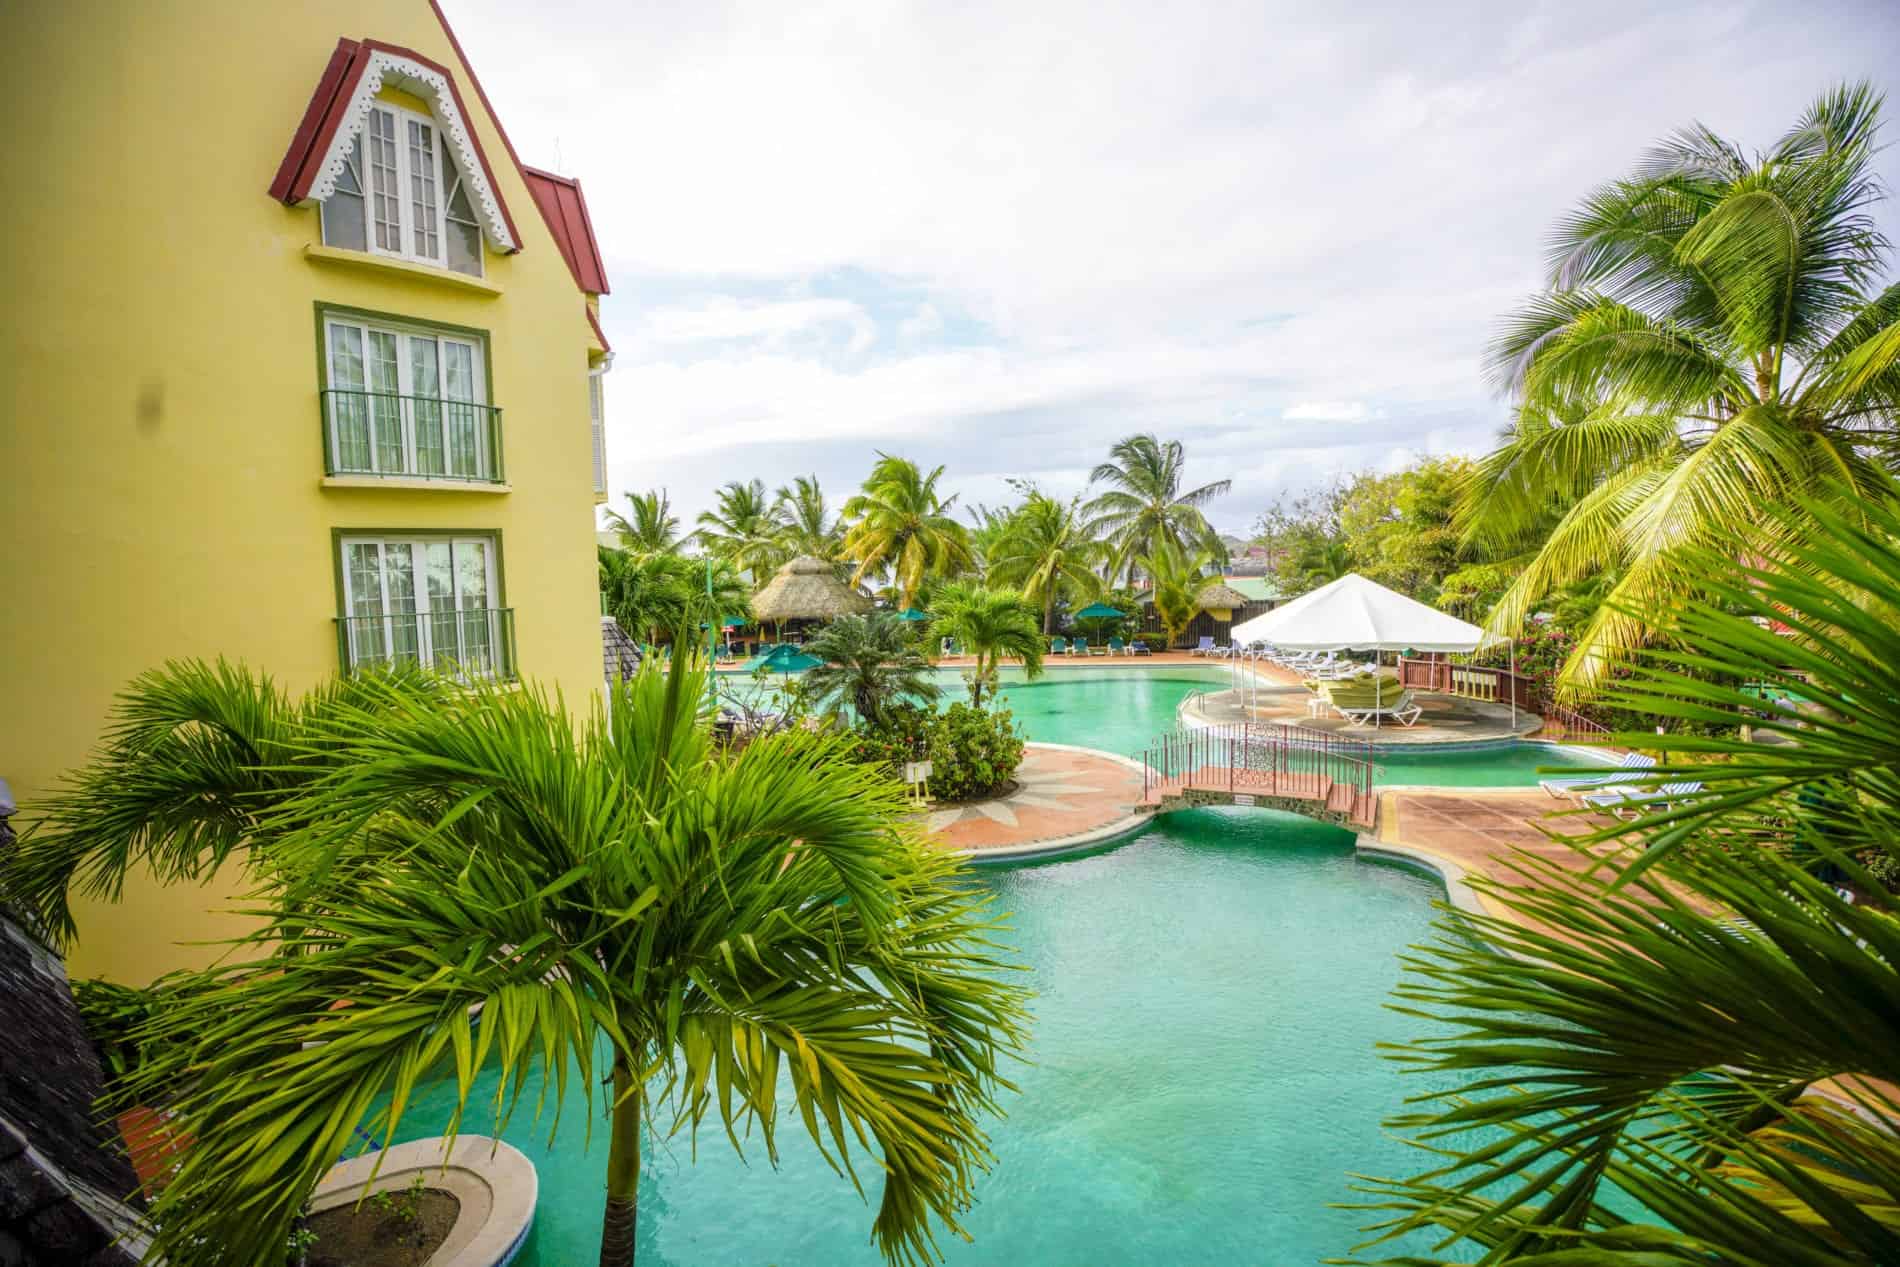 Coco Palm Resort, St Lucia